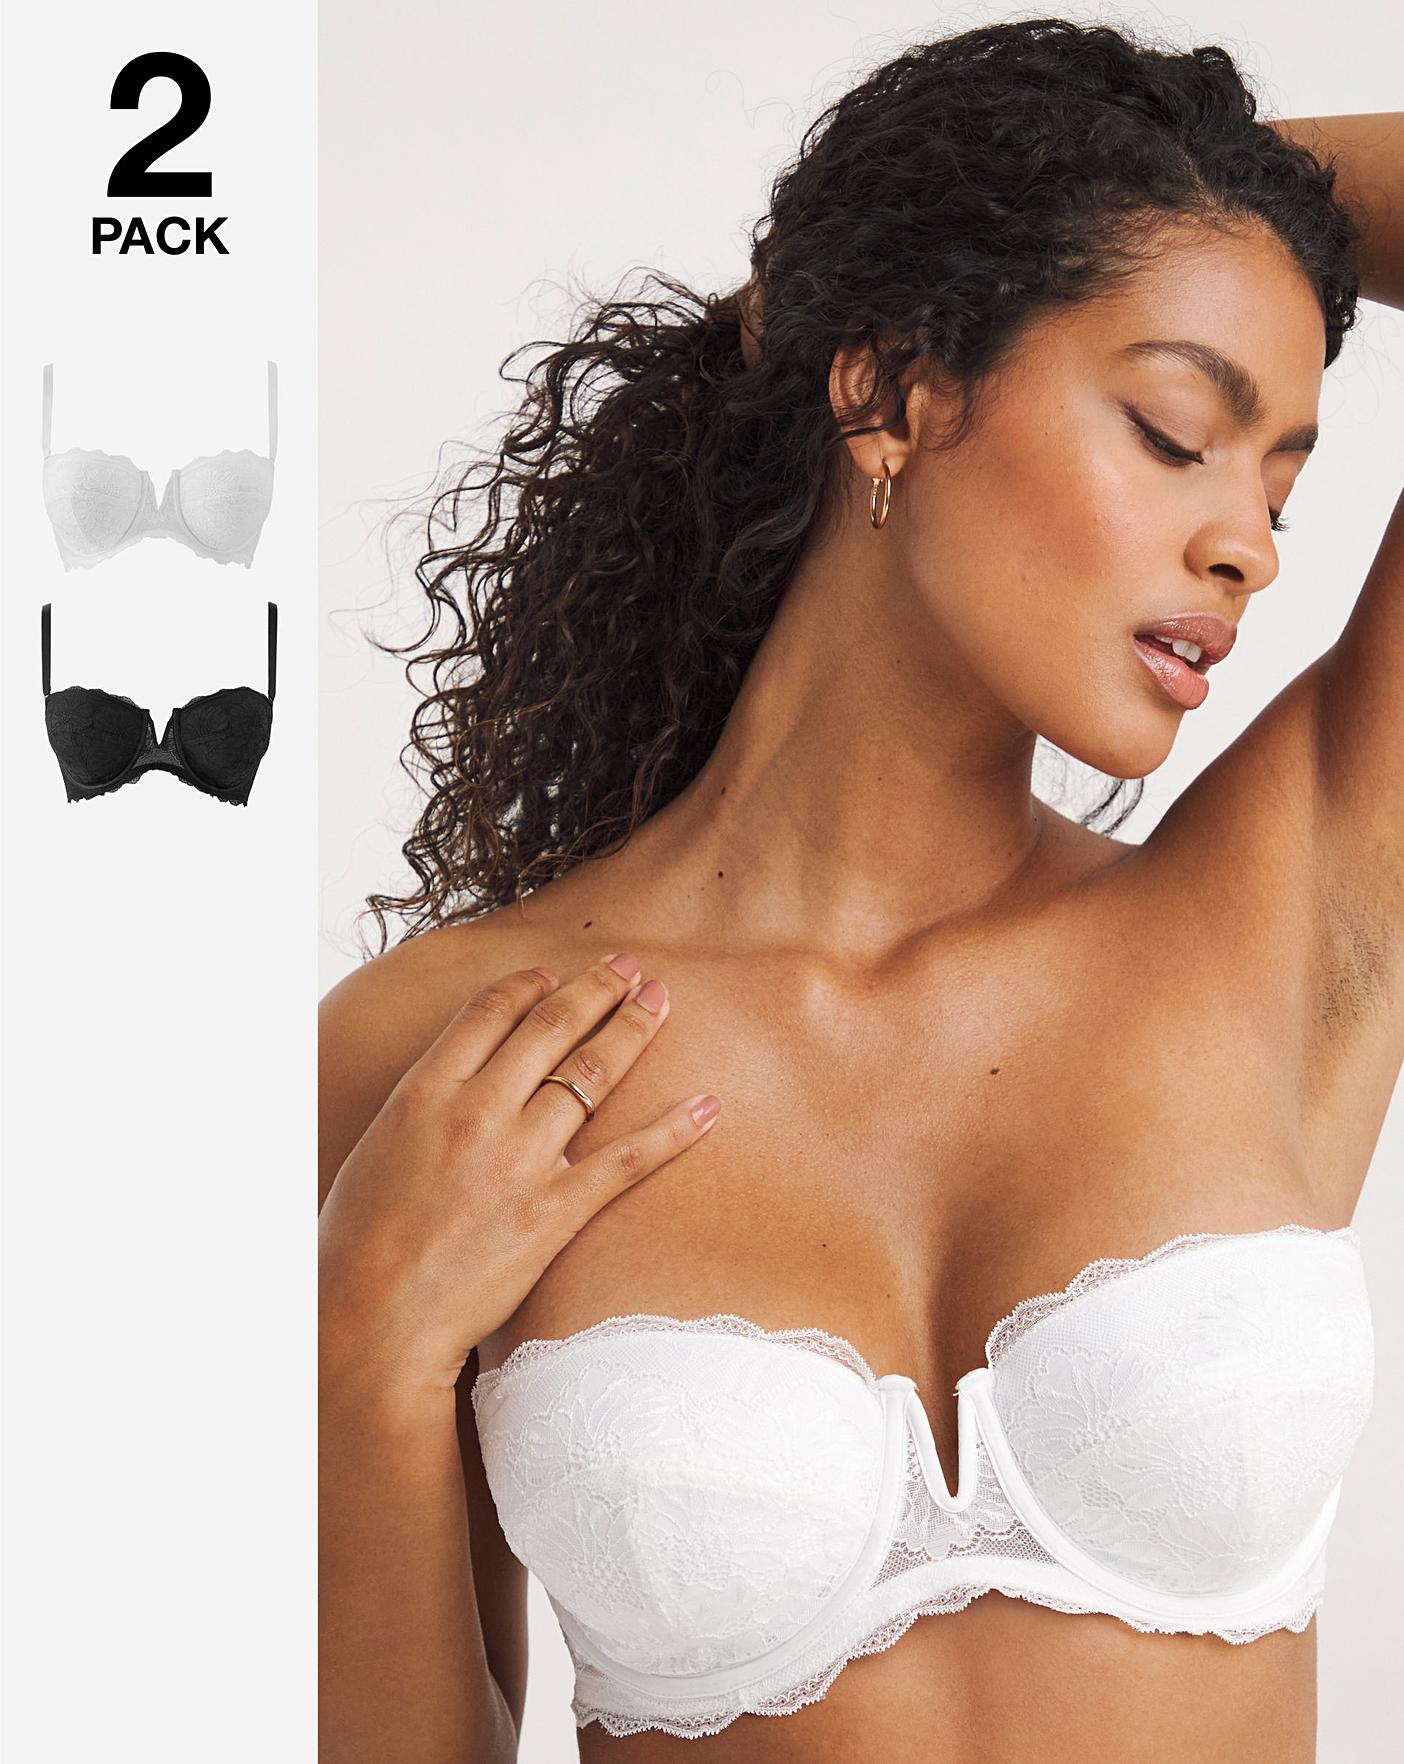 2-pack Soft-cup Lace Bras - Black/white - Ladies